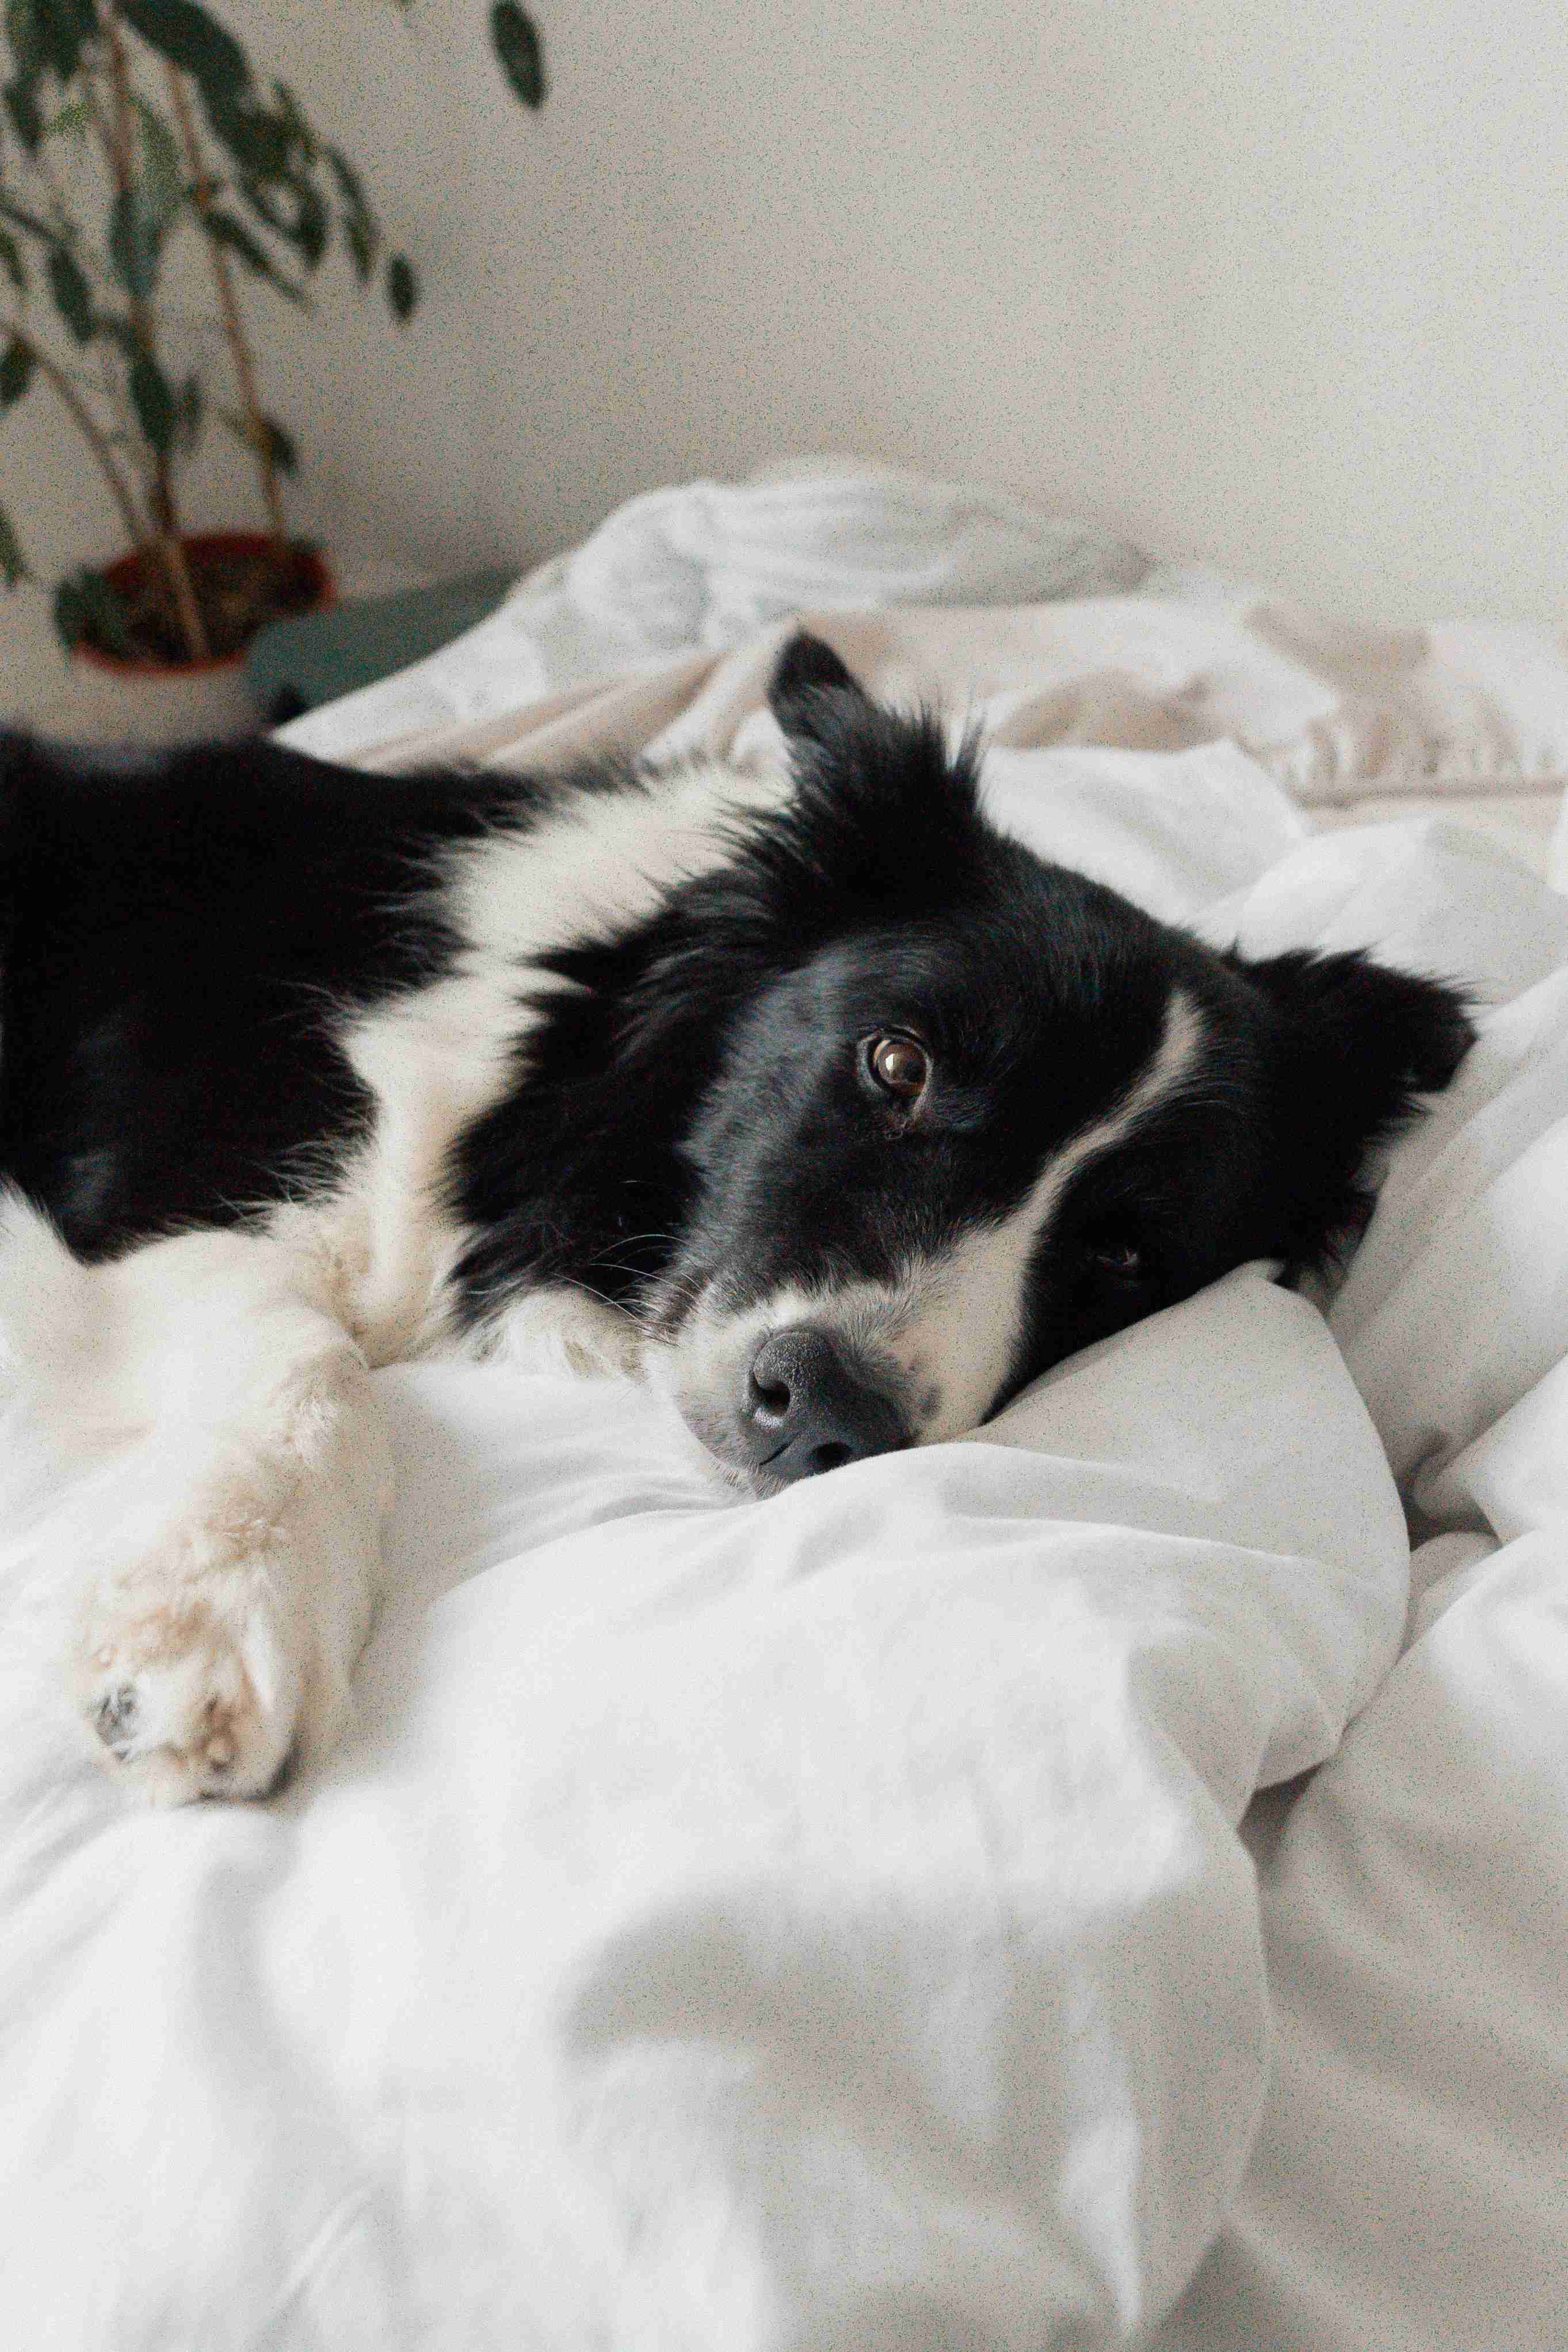 Crate Training 101: A Step-by-Step Guide to Successfully Train Your Border Collie Puppy